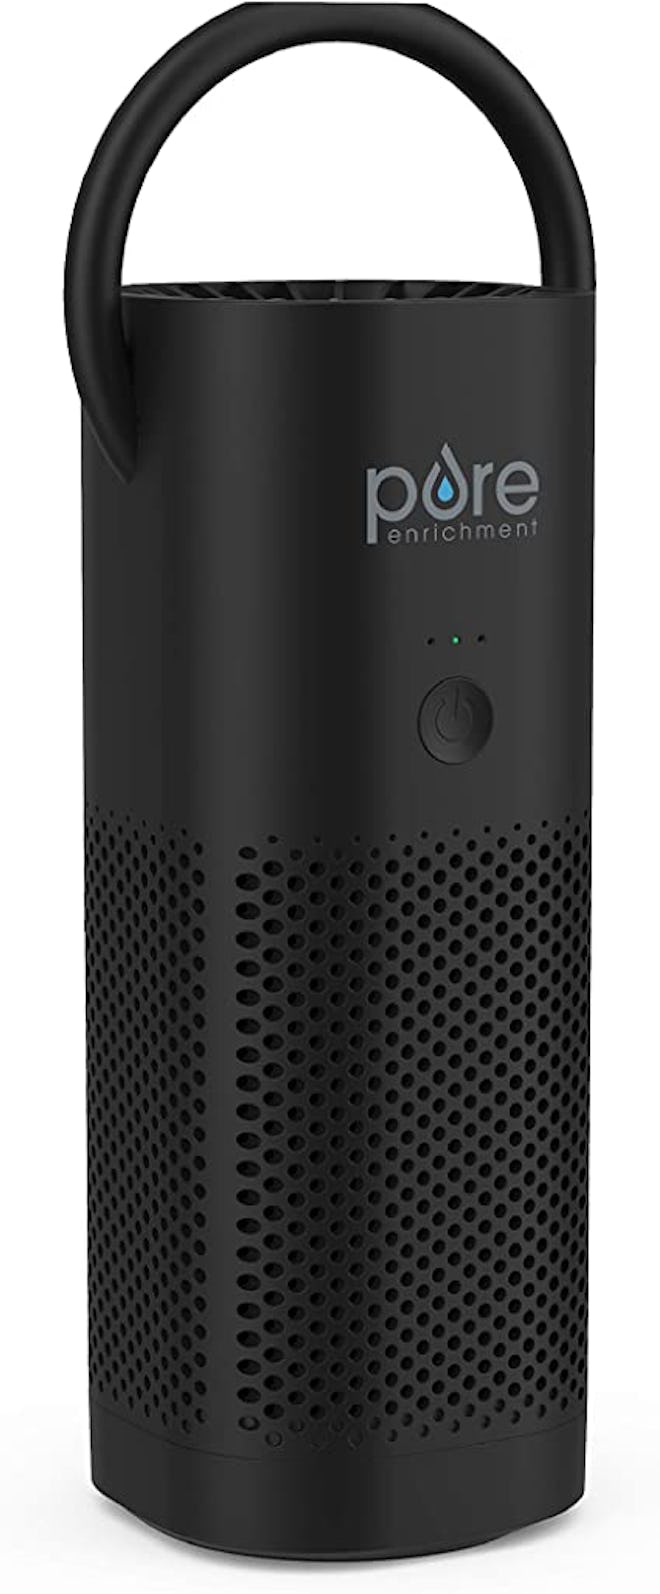 This mini, portable air purifier is one of the best air purifiers for apartments.